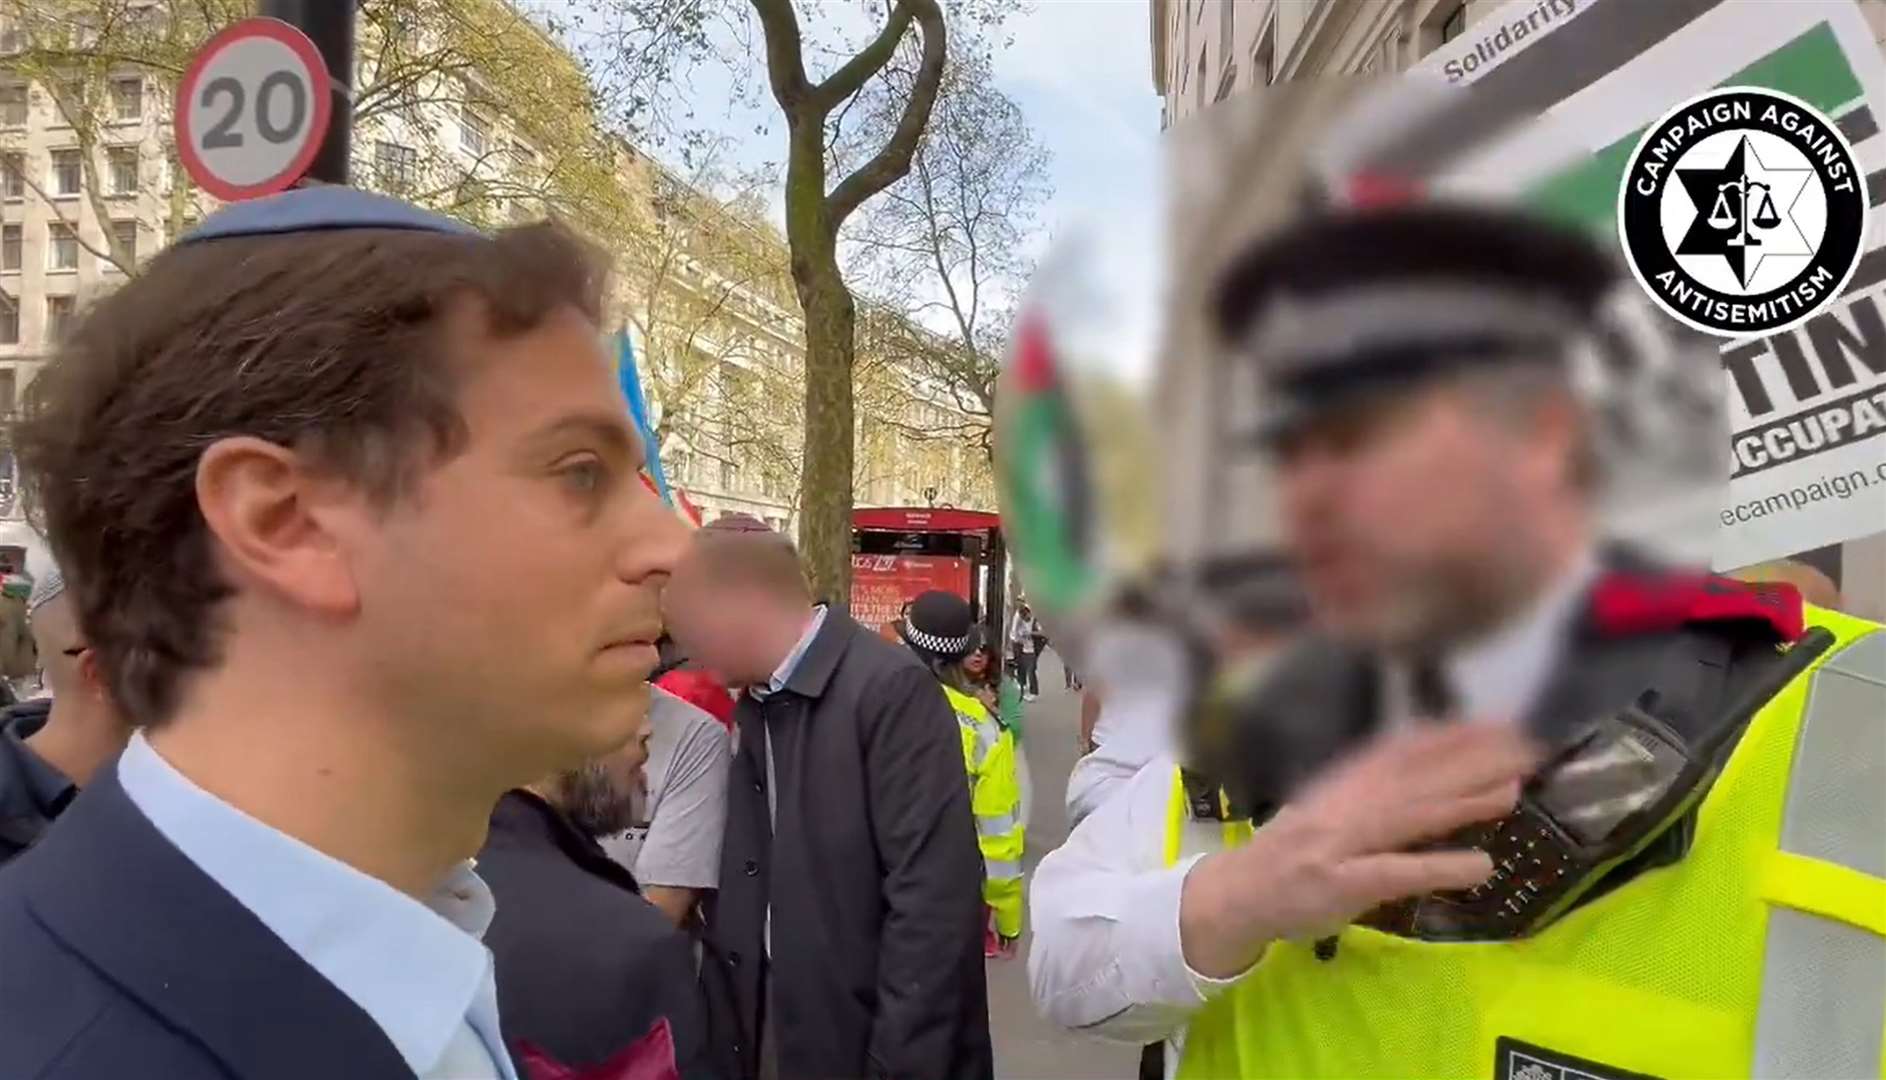 Campaign Against Antisemitism chief executive Gideon Falter was described as ‘openly Jewish’ by a police officer near a pro-Palestinian protest (Campaign Against Antisemitism/PA)